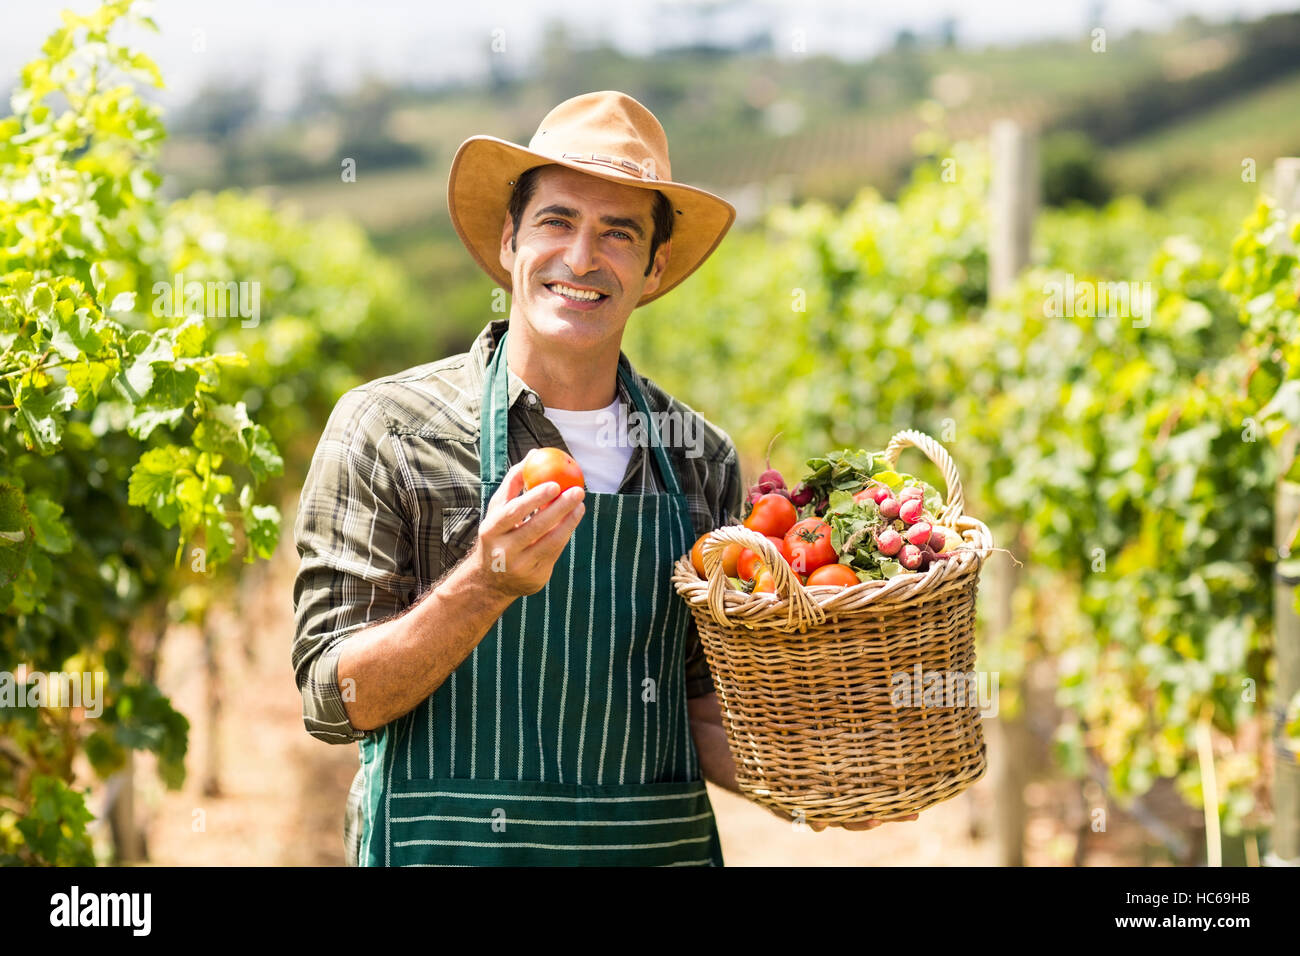 Portrait of happy farmer holding a basket of vegetables Stock Photo